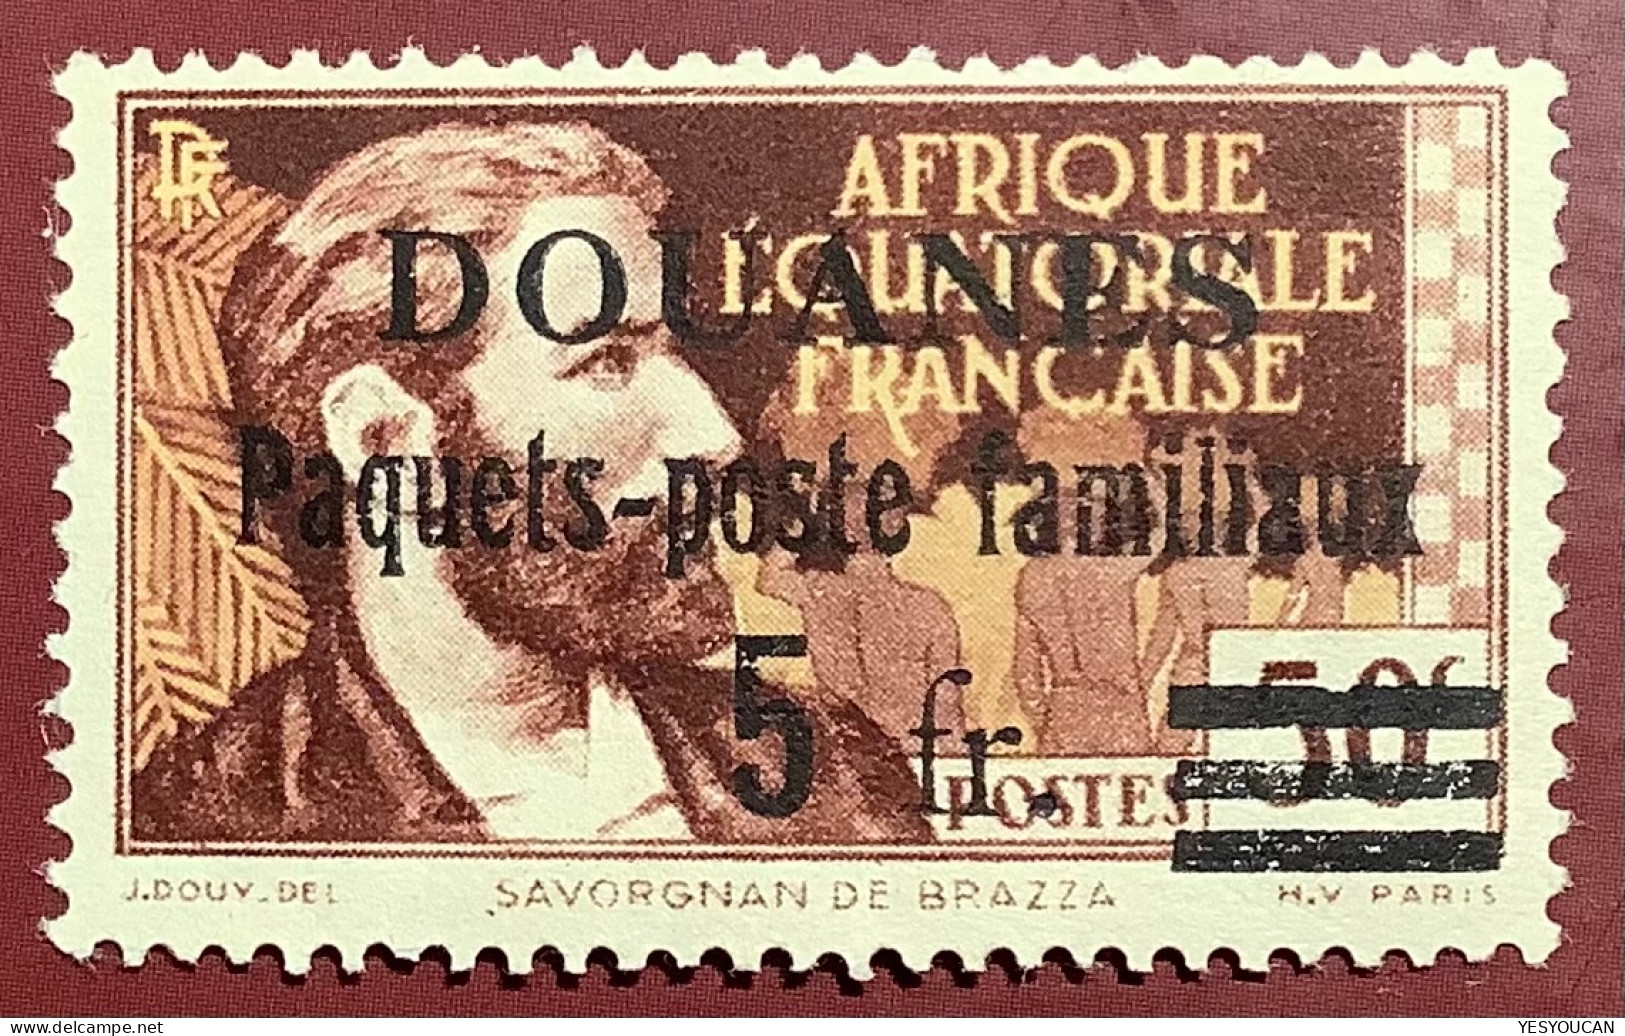 AEF 1937 50c Brazza DOUANES PAQUETS-POSTE FAMILIAUX 5FR Timbre Fiscal France Libre? Guerre 1939-1945 (revenue Stamp WW2 - Unused Stamps